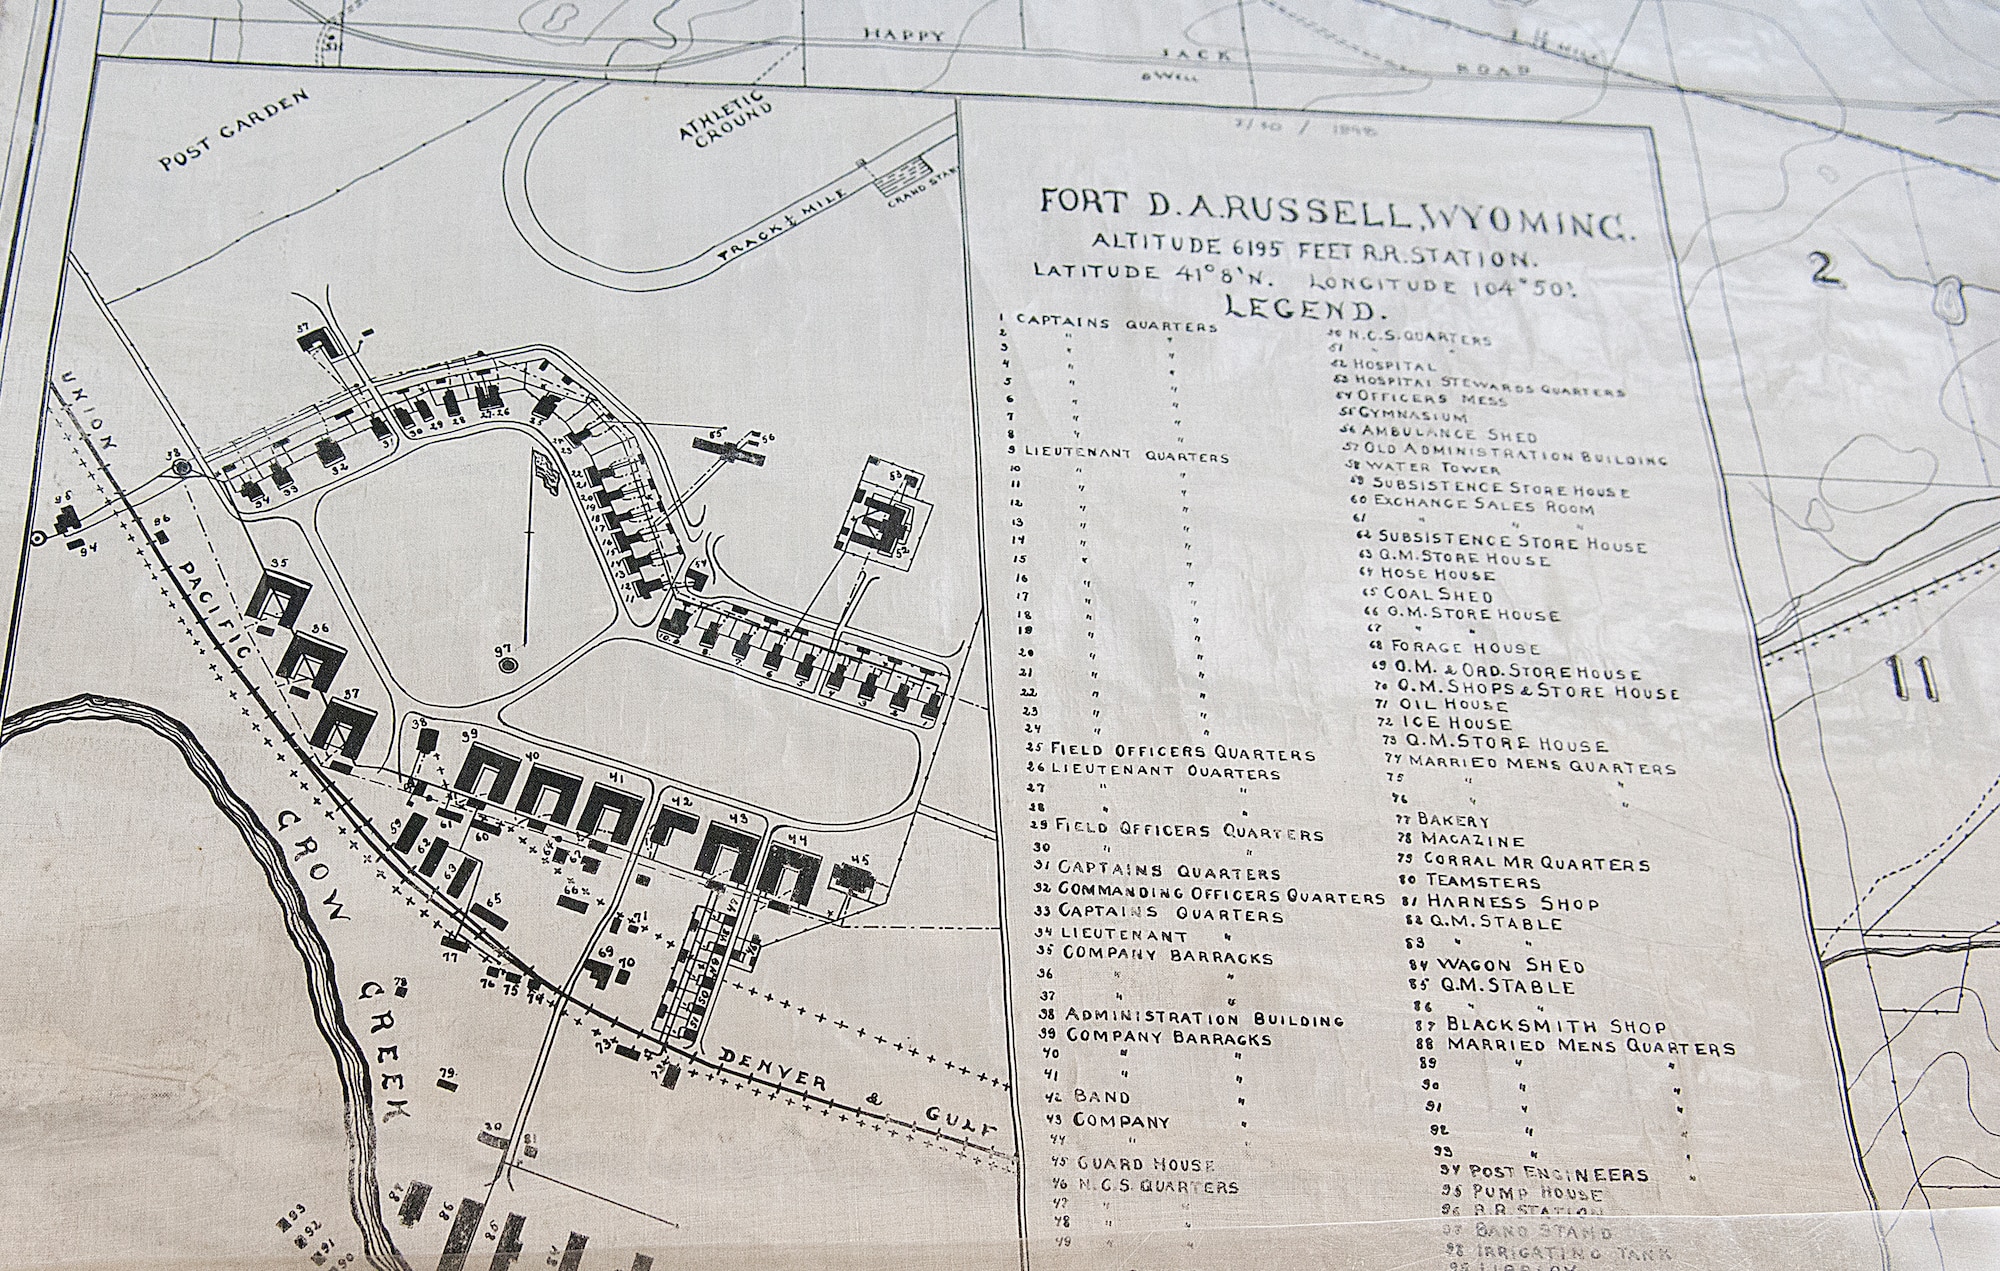 A map of Fort D.A. Russell dating back to 1898 shows the early layout of the installation that was to become F. E. Warren Air Force Base. The map is one of more than 5000 historical documents archived in the F. E. Warren curation facility known as “the bunker.” (U.S. Air Force photo by R.J. Oriez) 